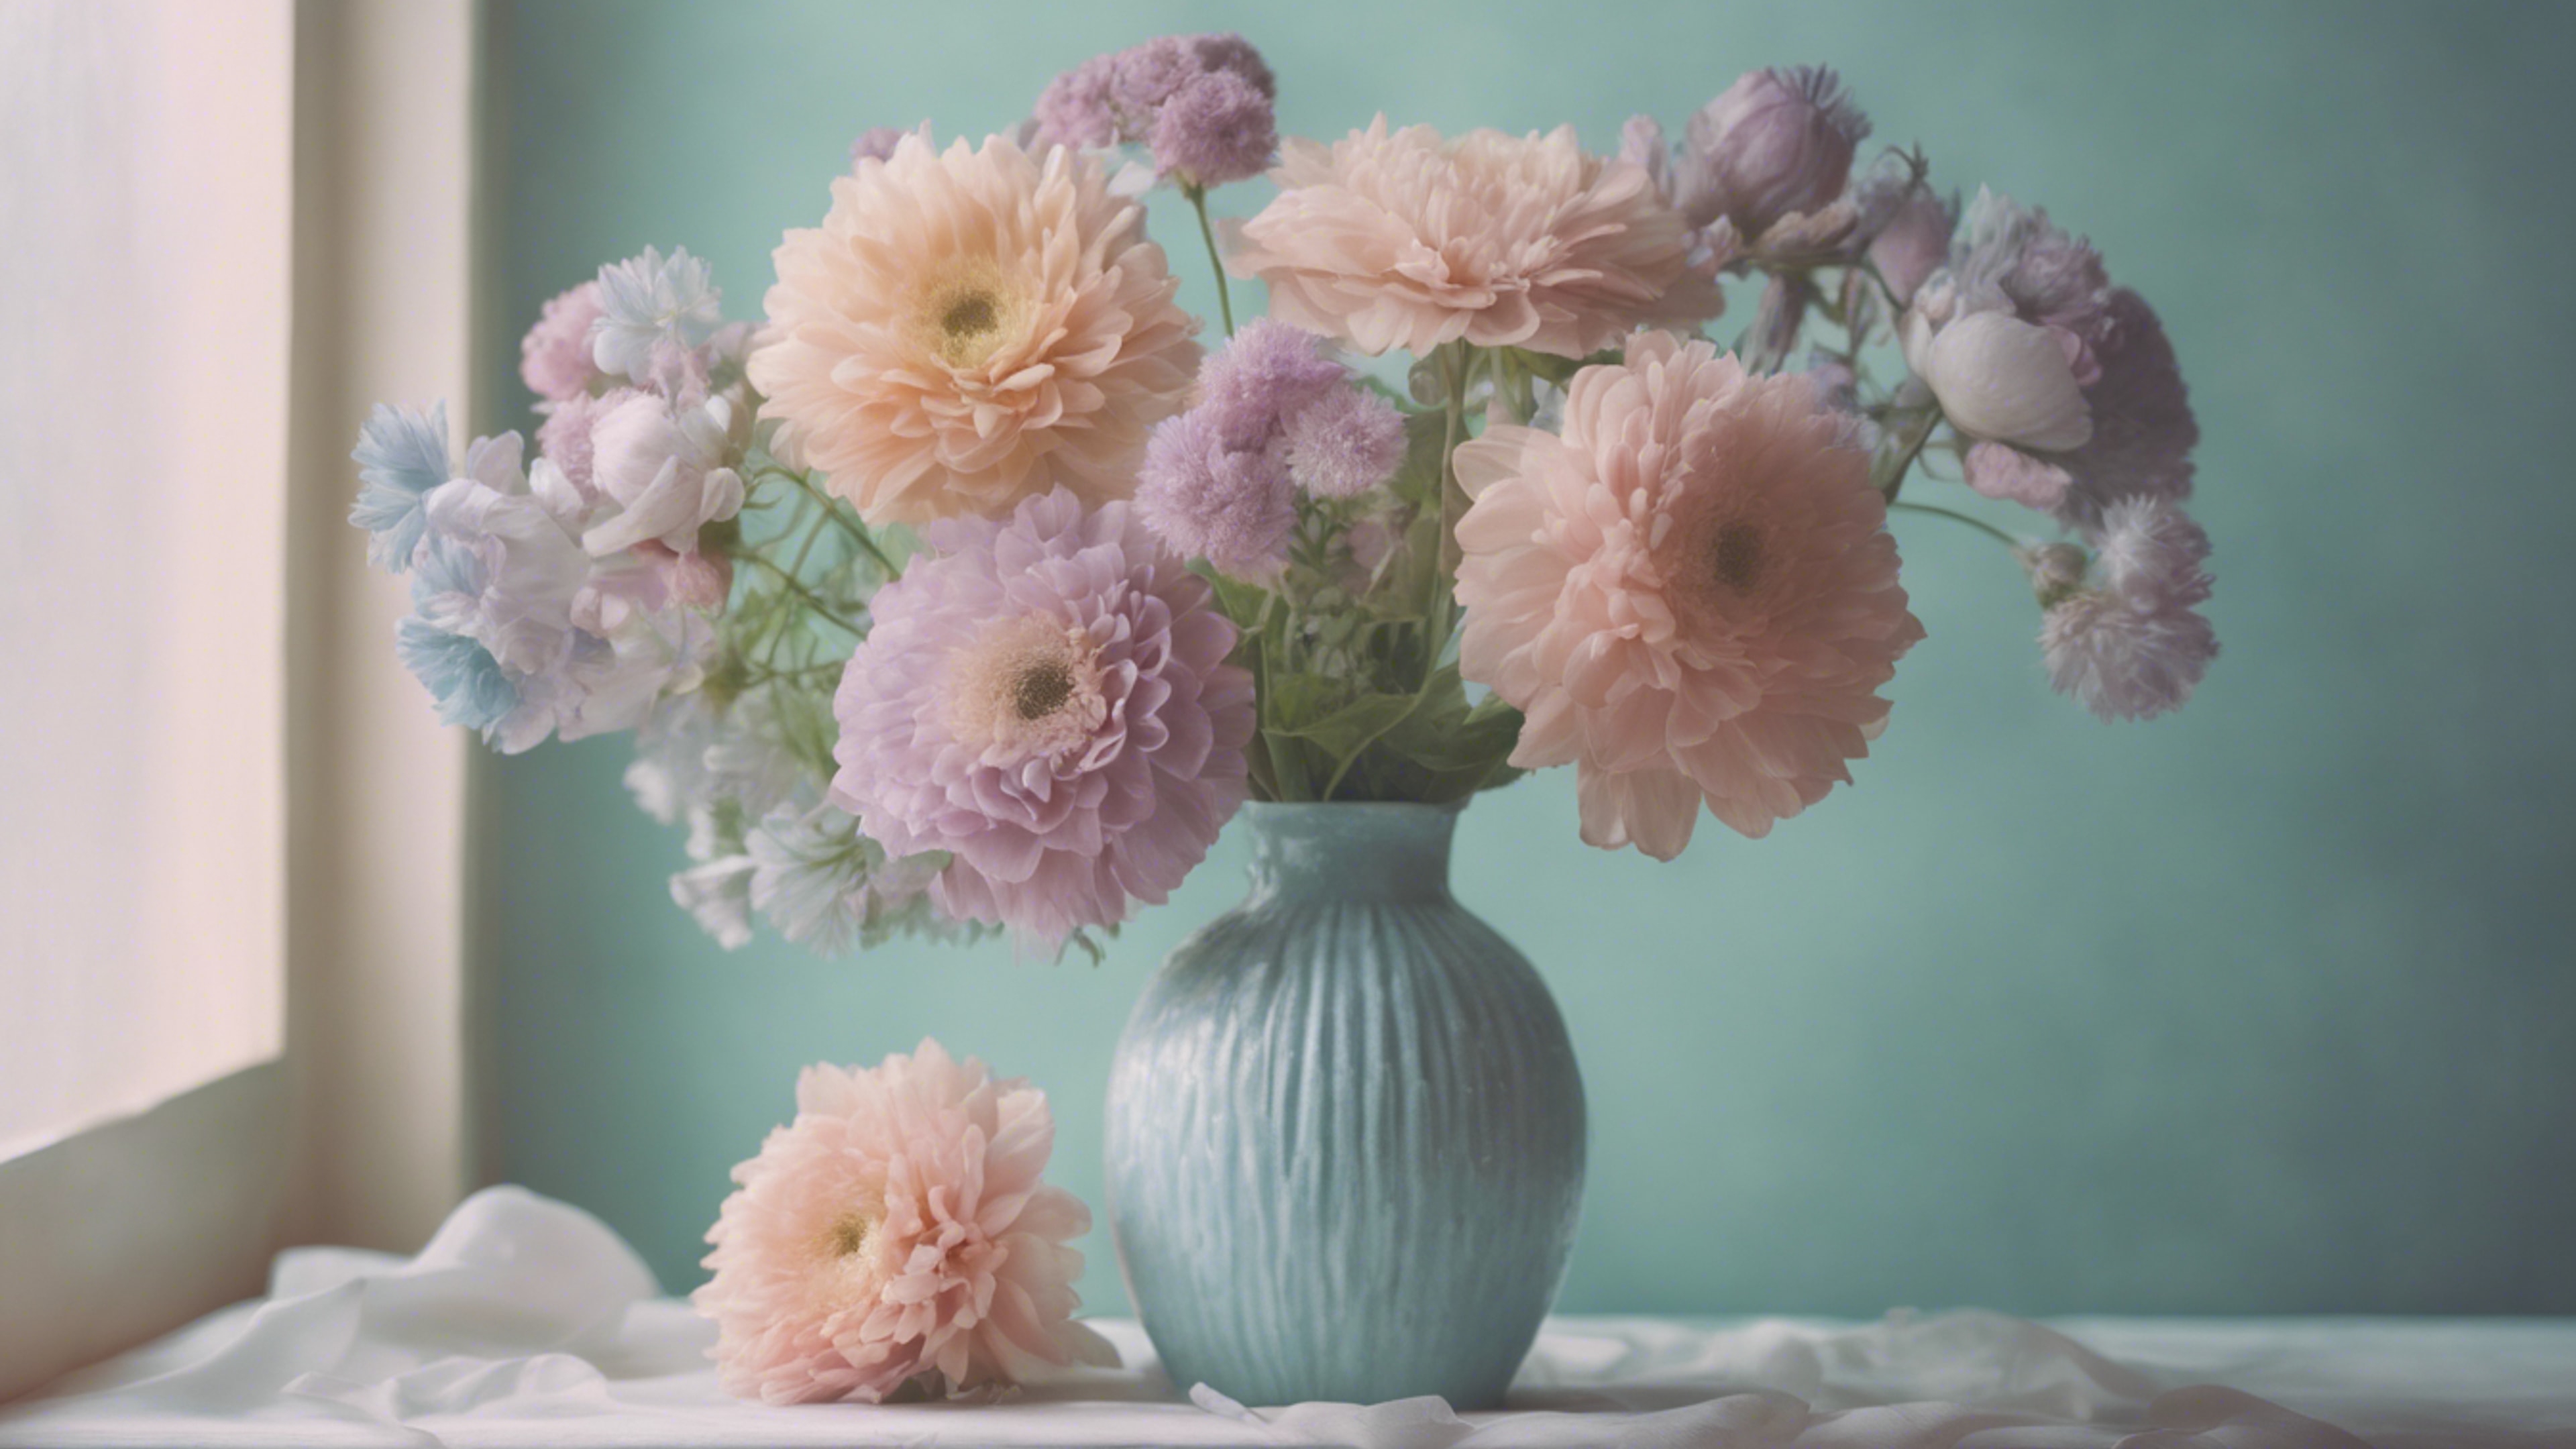 A pastel toned still-life painting featuring cool pastel colored flowers in a vase. Behang[6e1327f815a34bc2b32b]